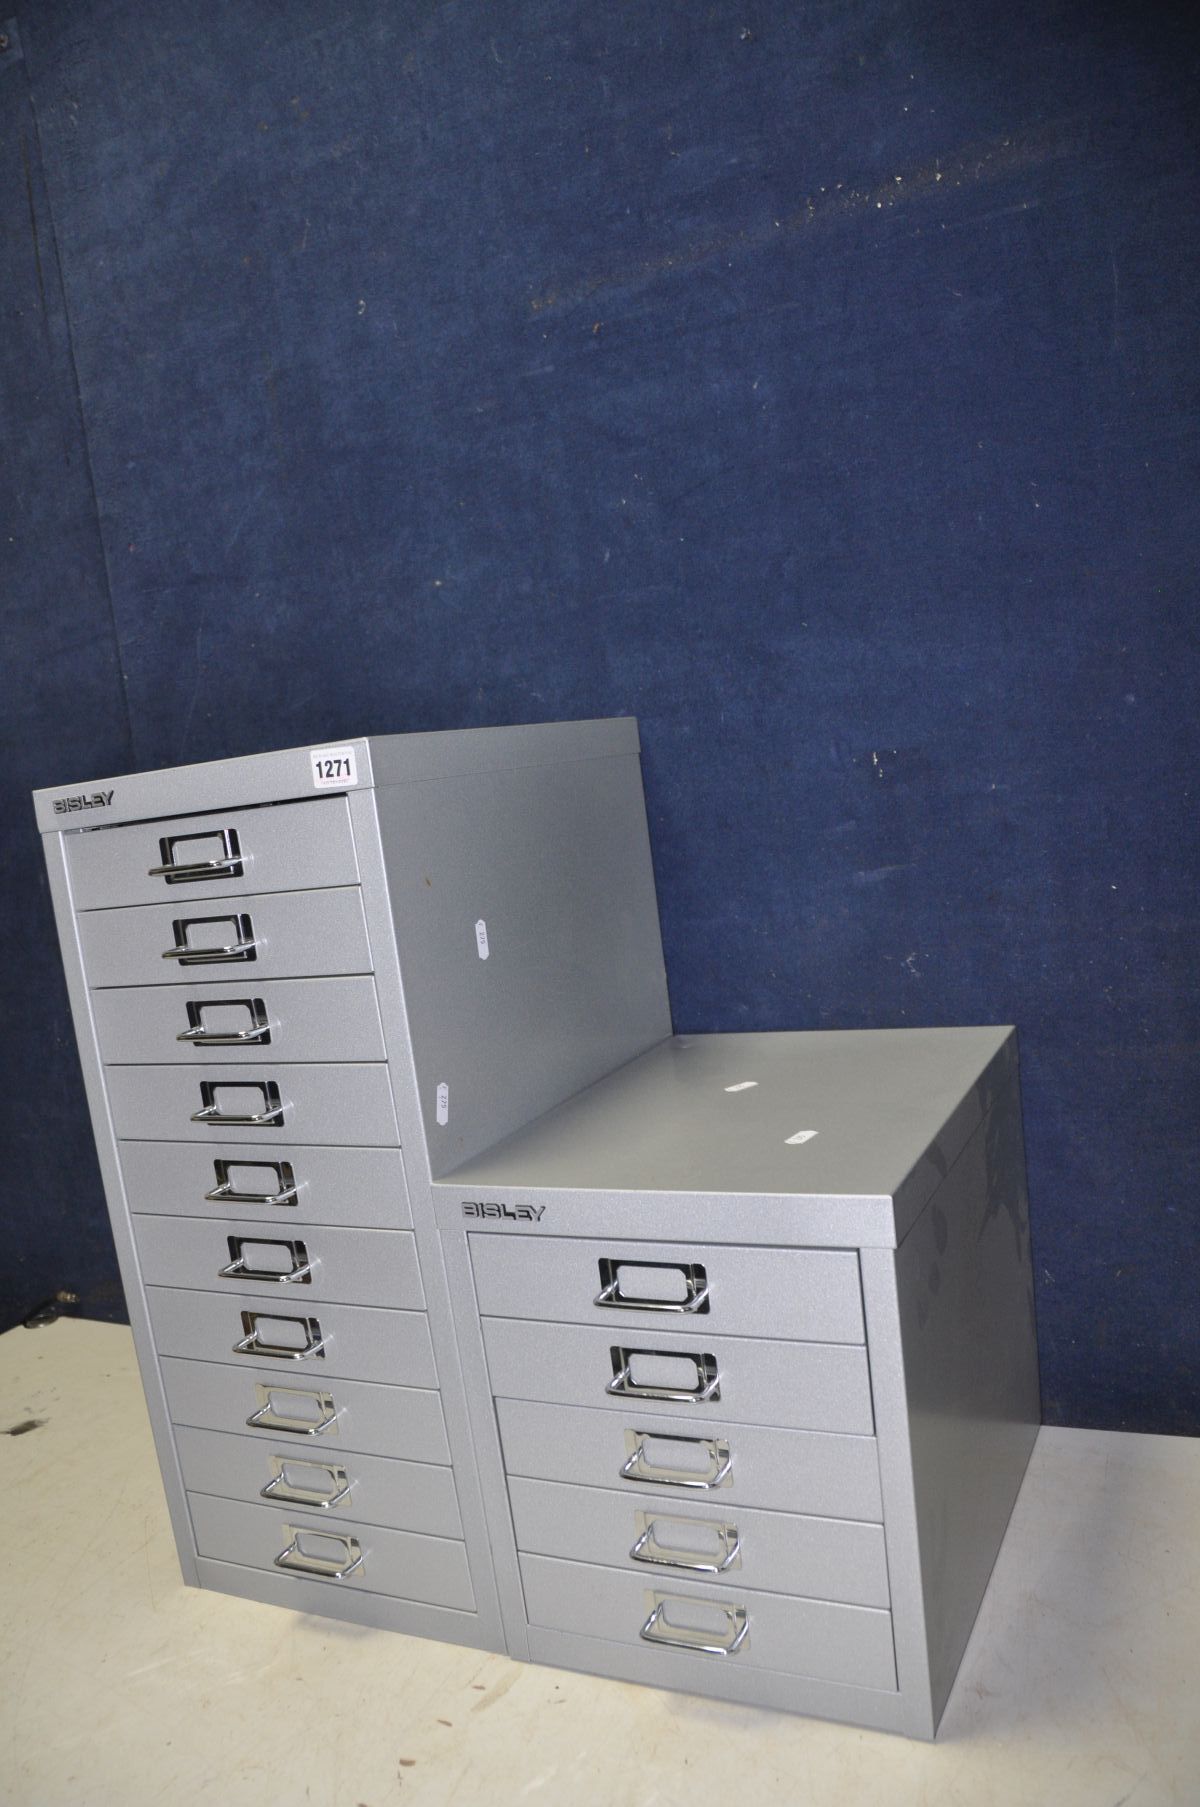 BILSLEY MULTIDRAW CABINETS comprising a ten draw cabinet along with a smaller five draw, the - Image 2 of 2